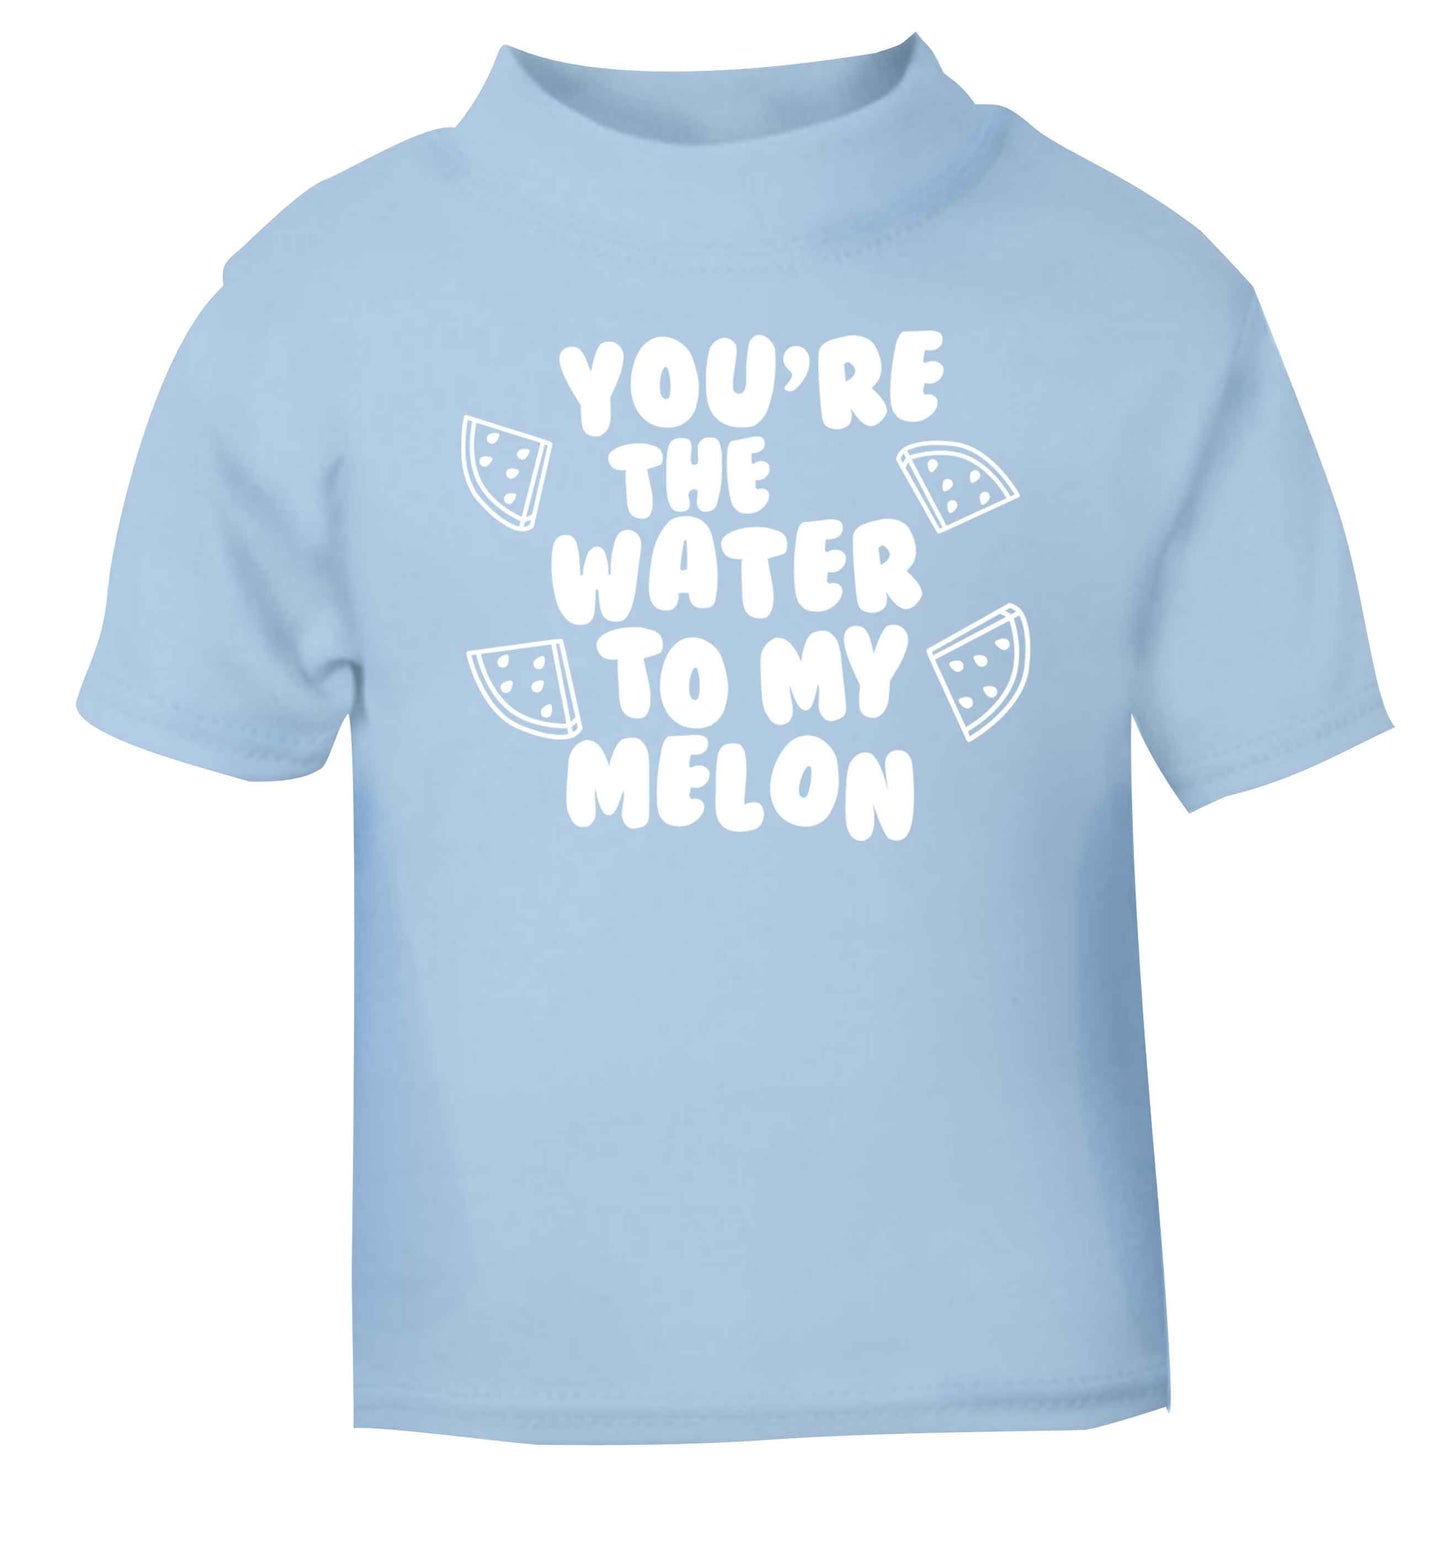 You're the water to my melon light blue baby toddler Tshirt 2 Years